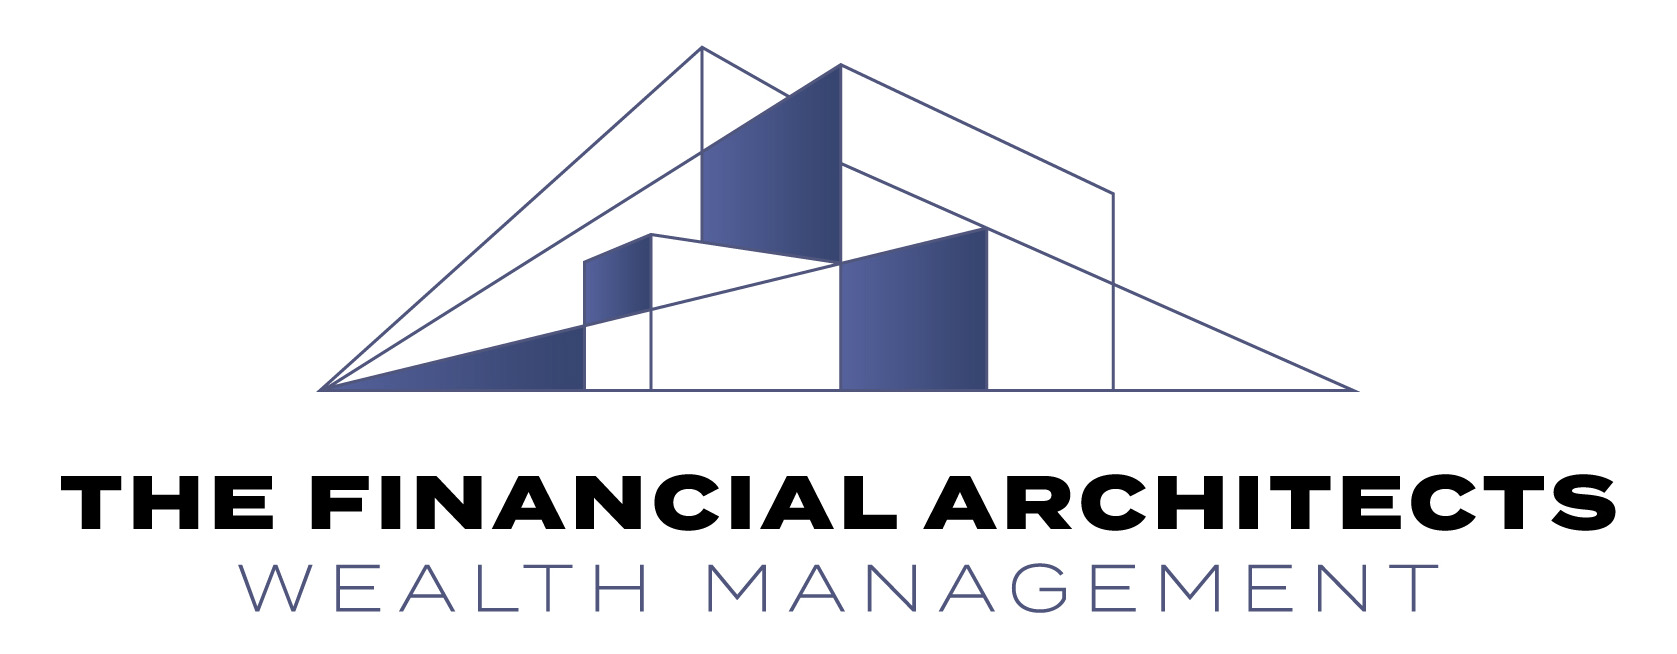 The Financial Architects Wealth Management